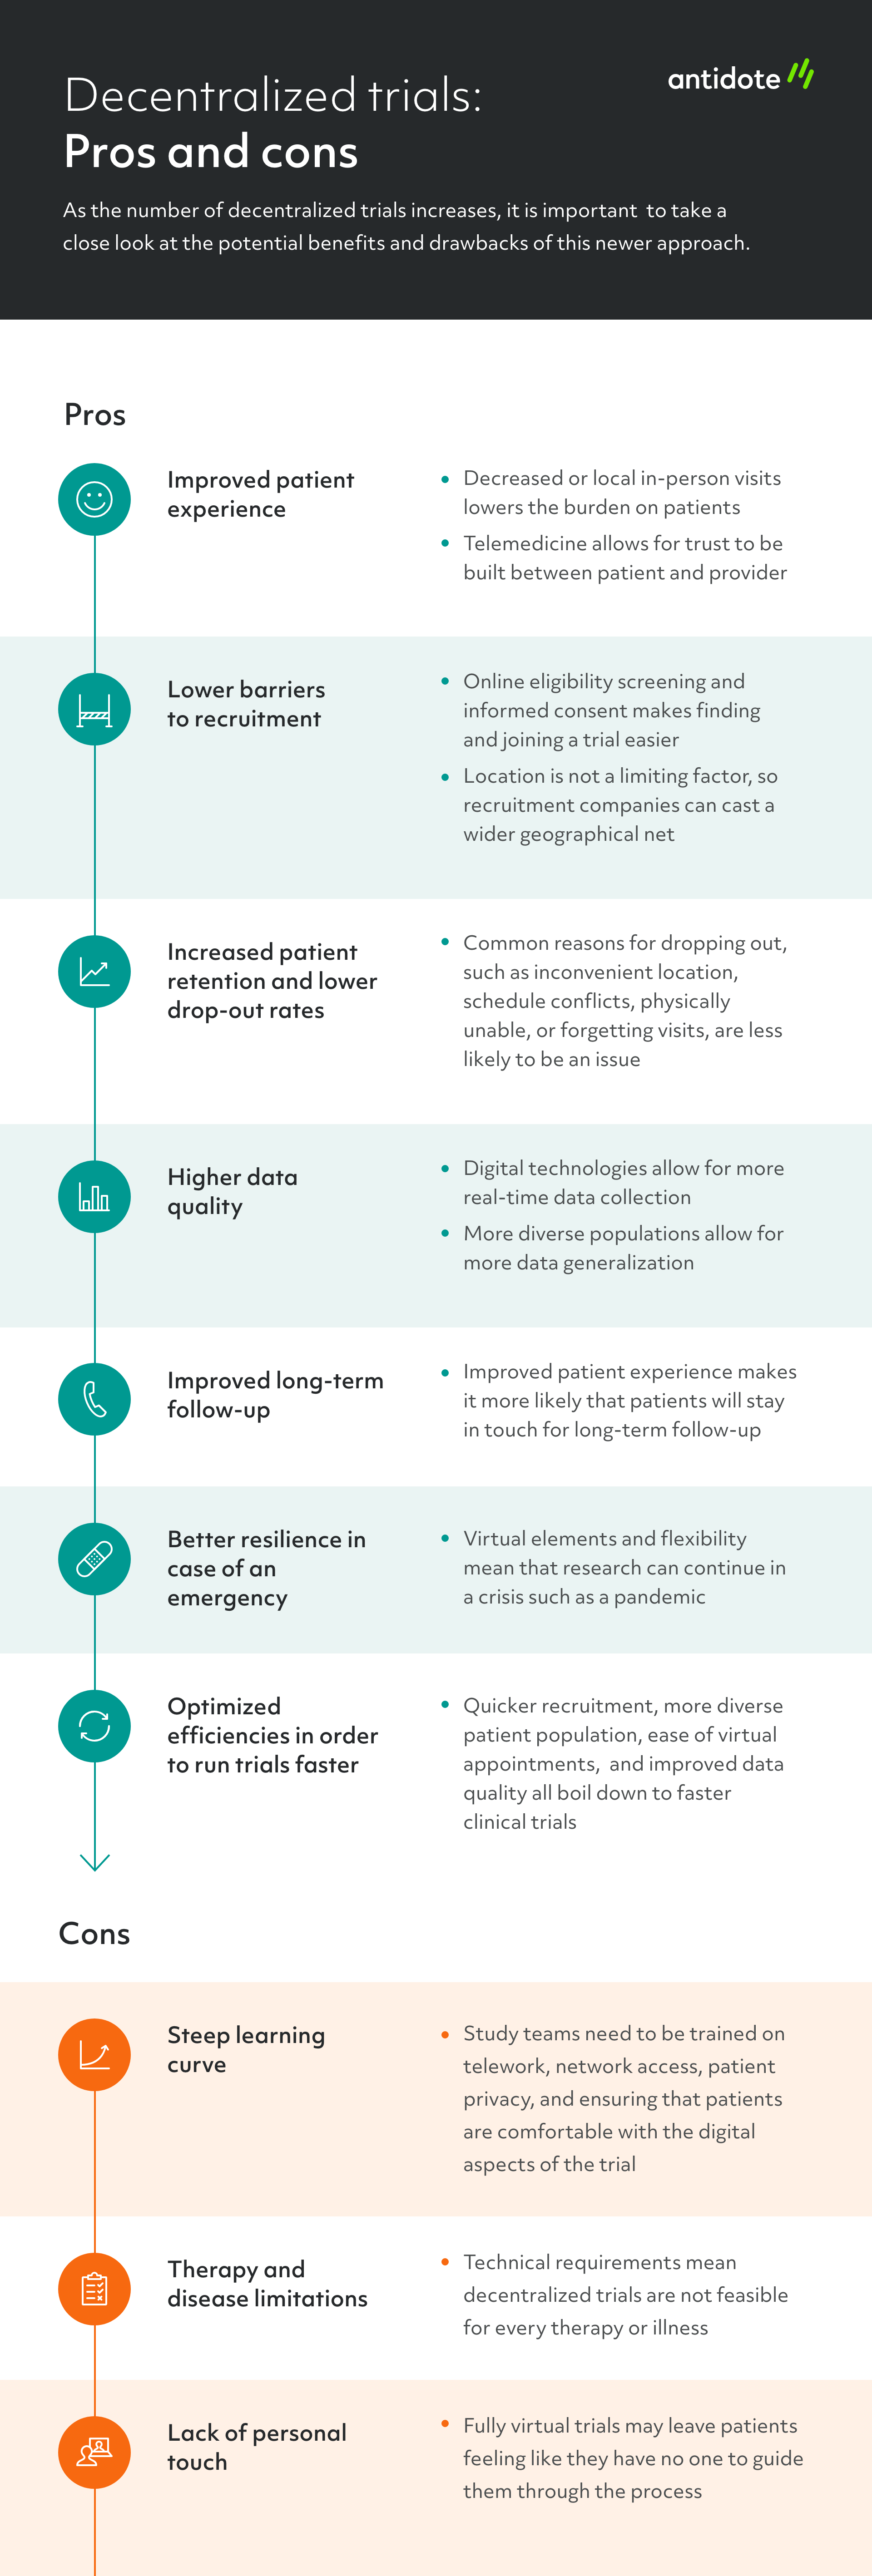 Pros And Cons Of Decentralized Clinical Trials [infographic]